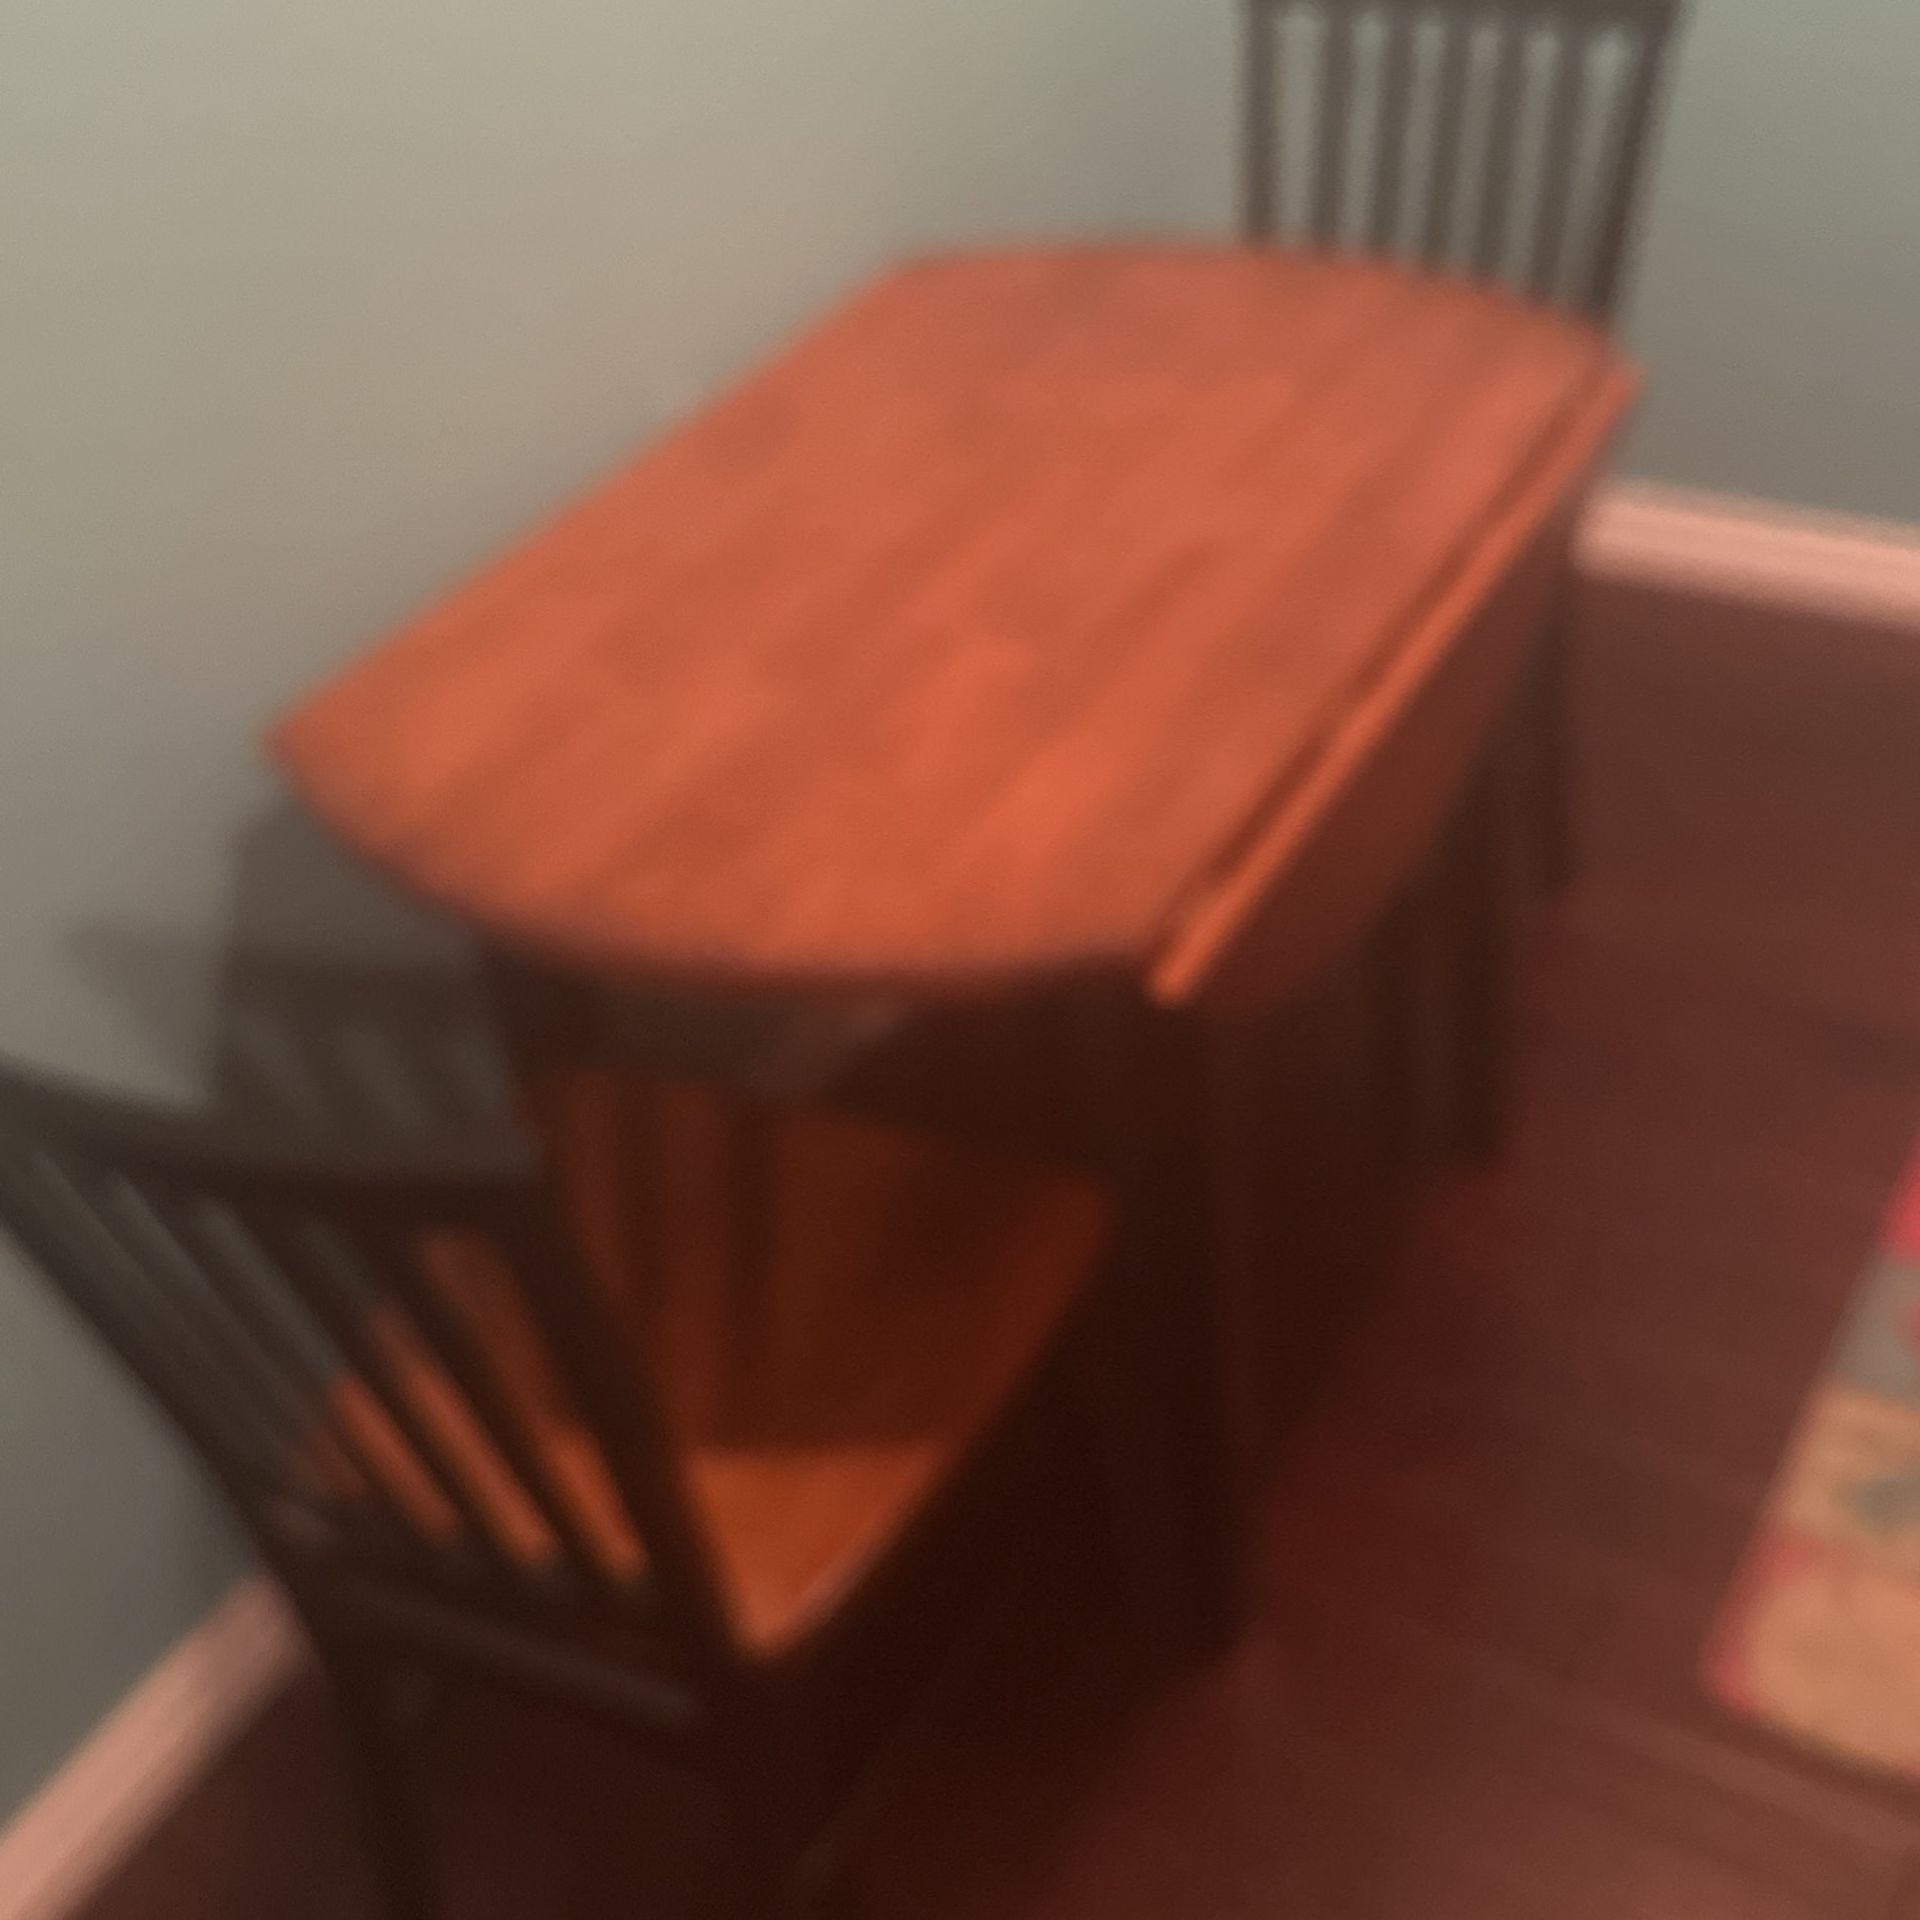 Table And 2 Chairs 